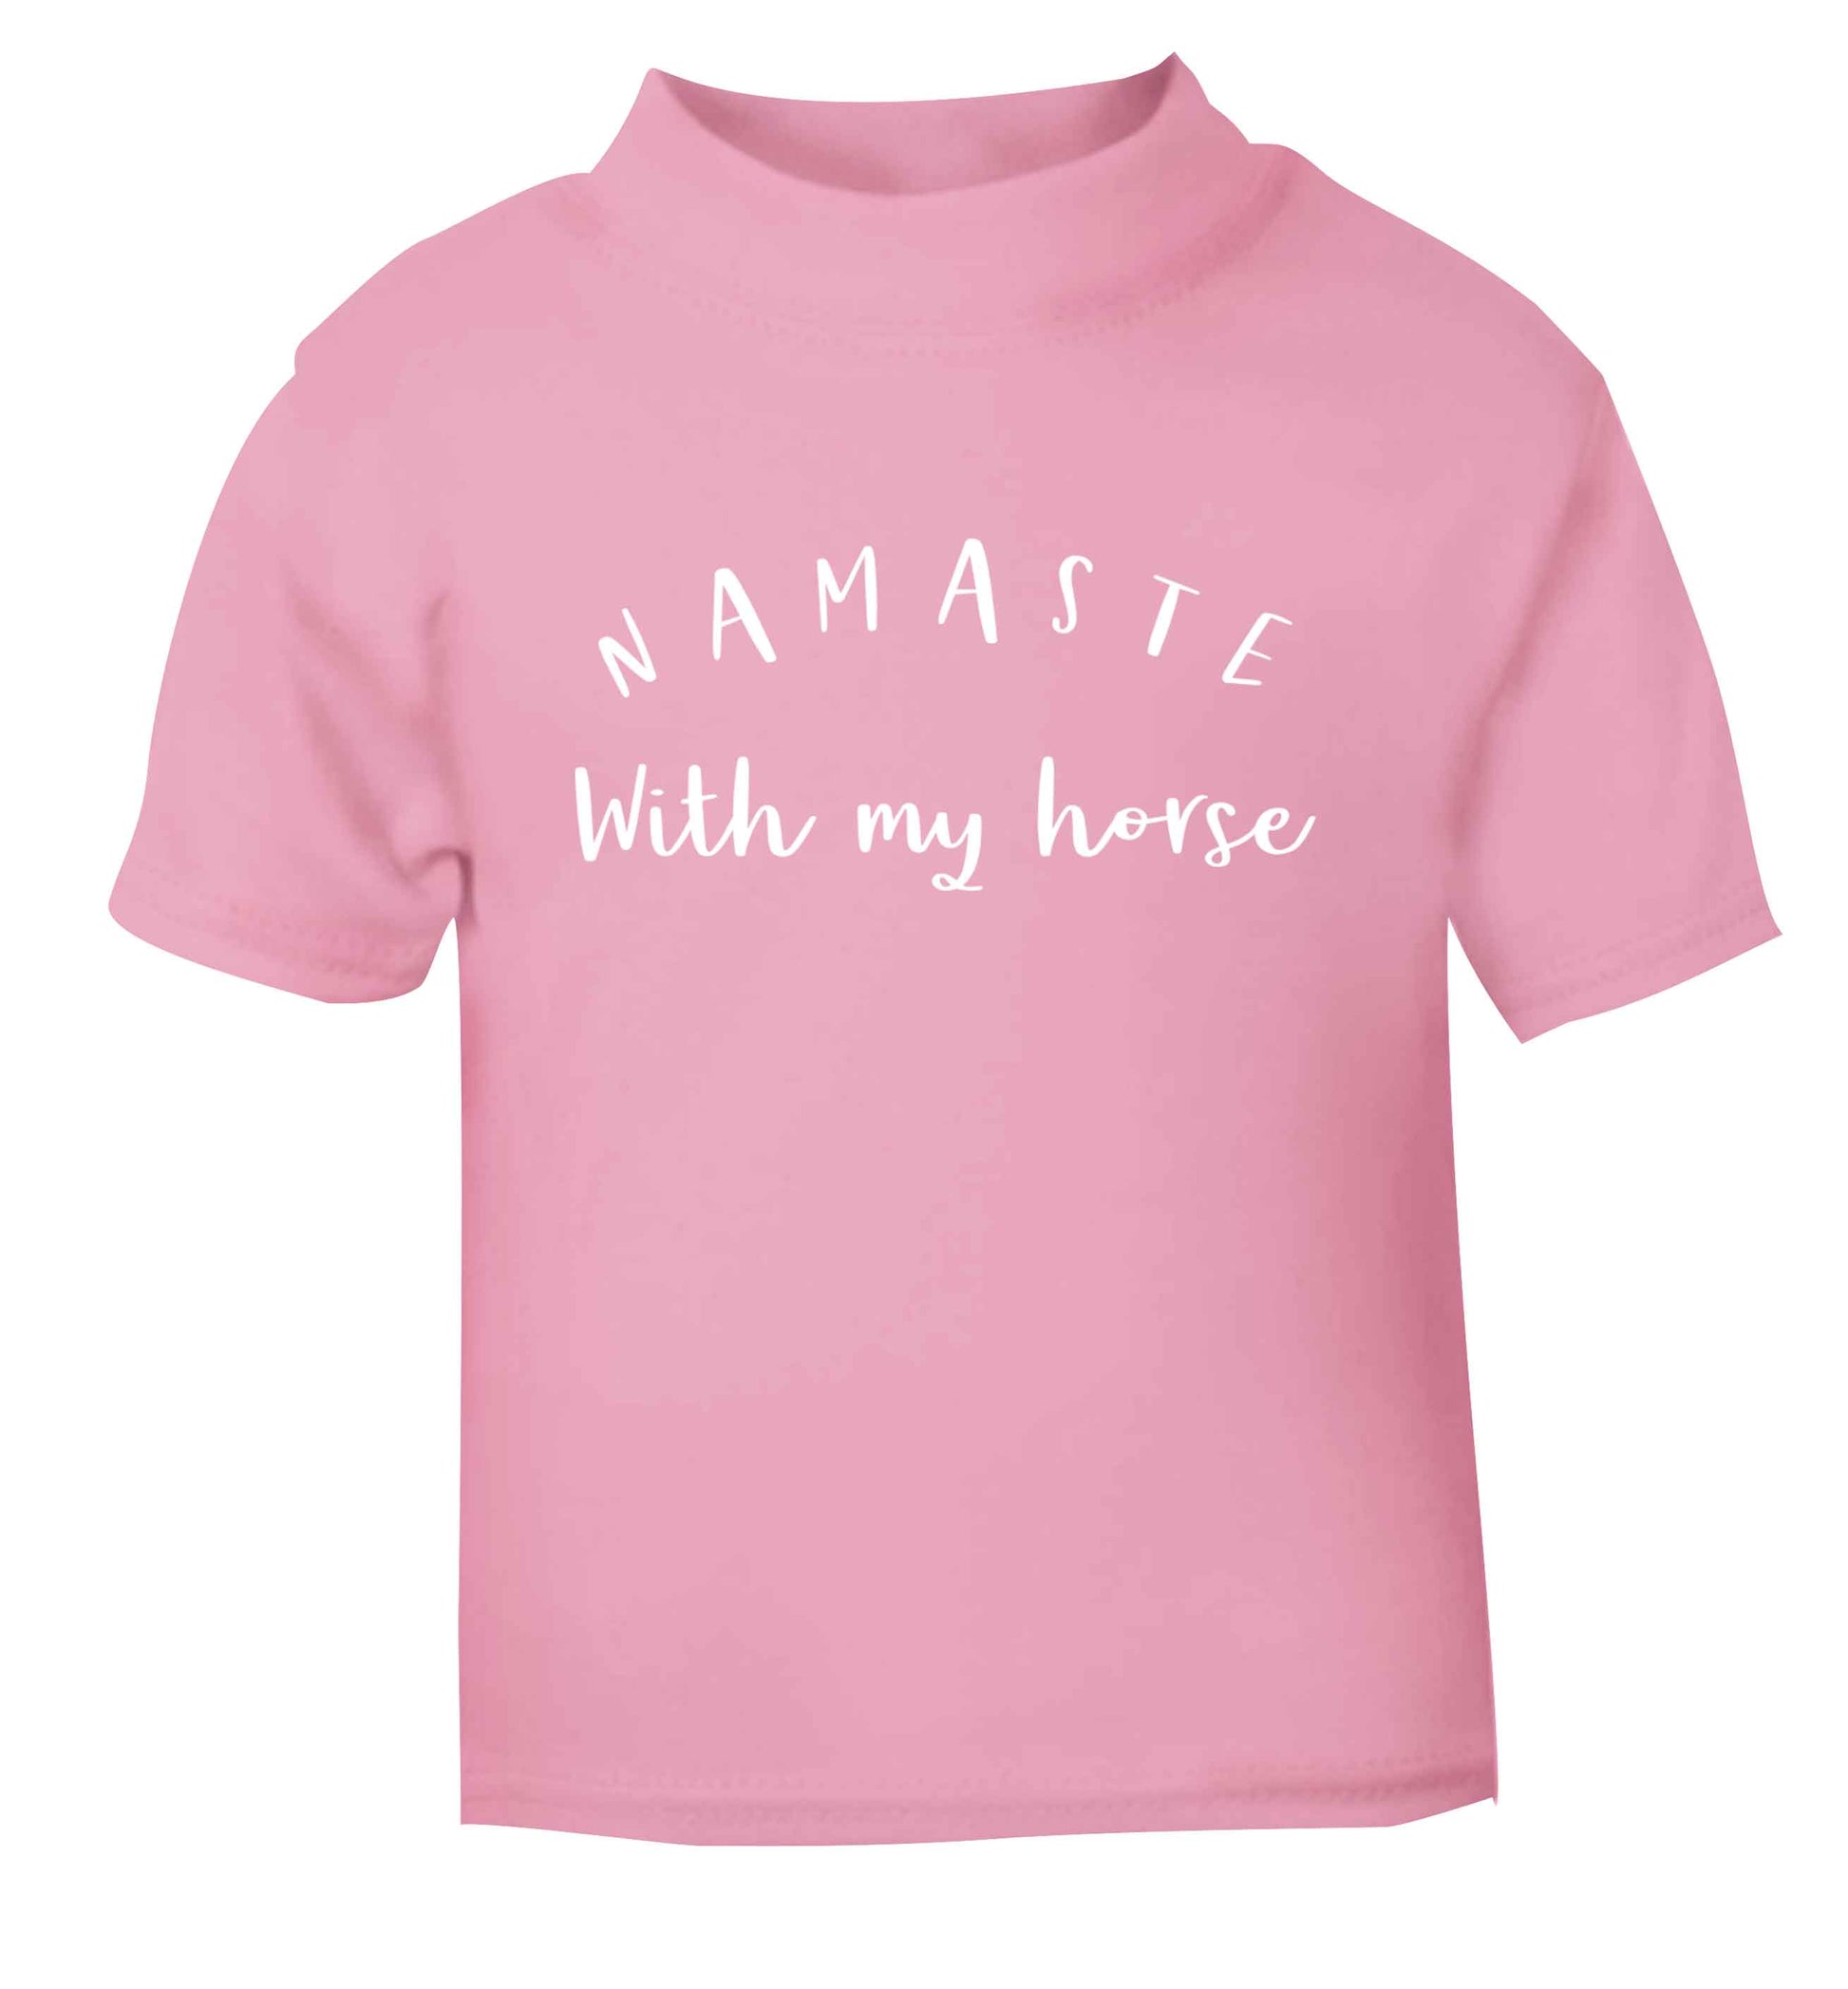 Namaste with my horse light pink baby toddler Tshirt 2 Years